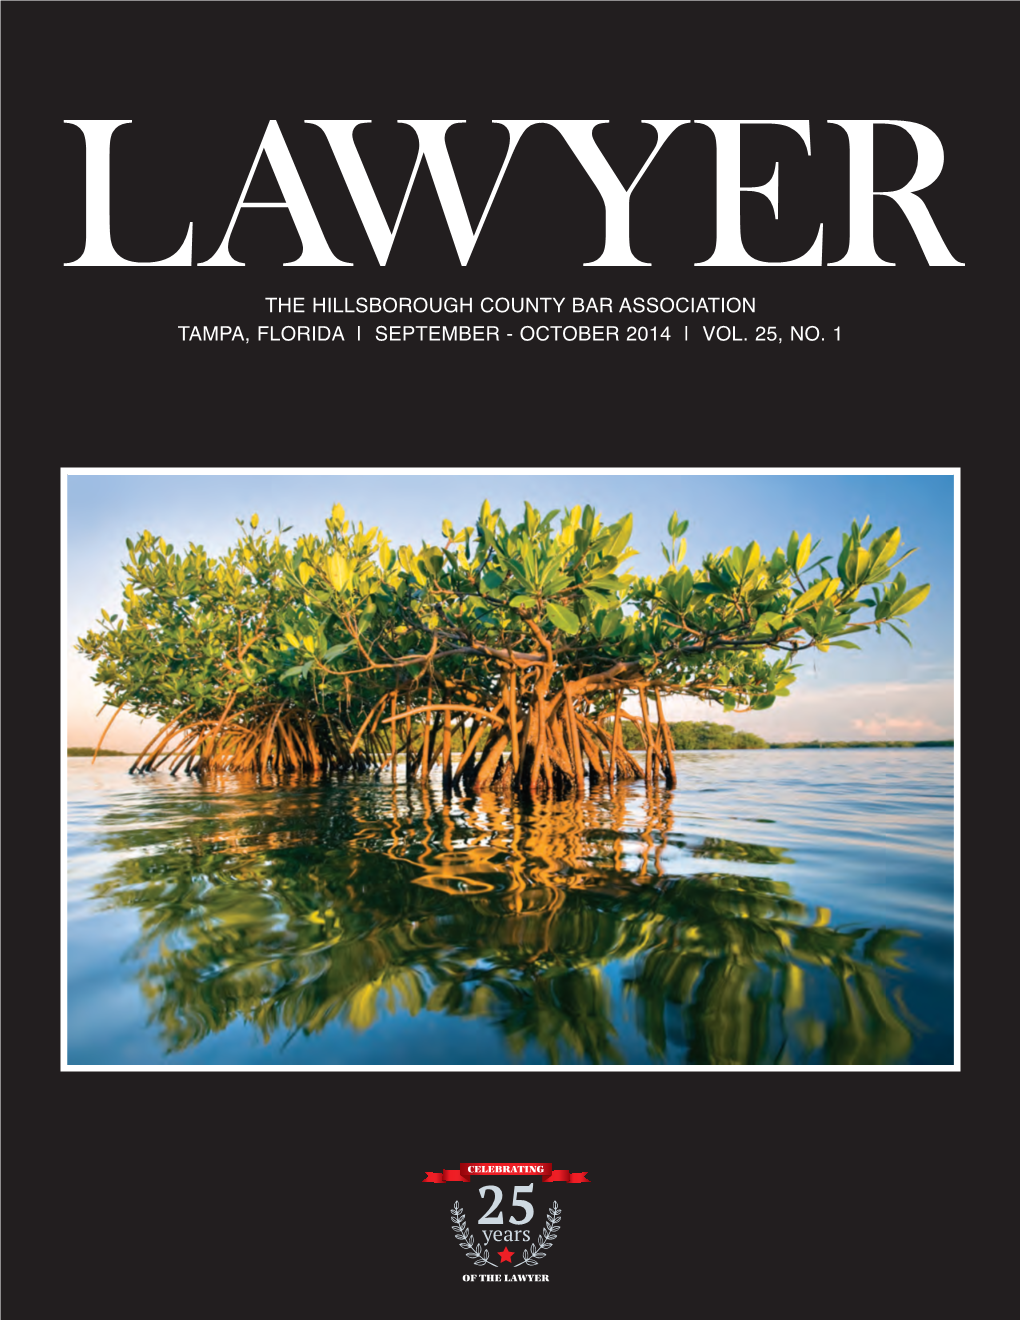 HILLSBOROUGH COUNTY BAR ASSOCIATION Lawyer Is Published Six Times Per Year by the Hillsborough County Bar Association